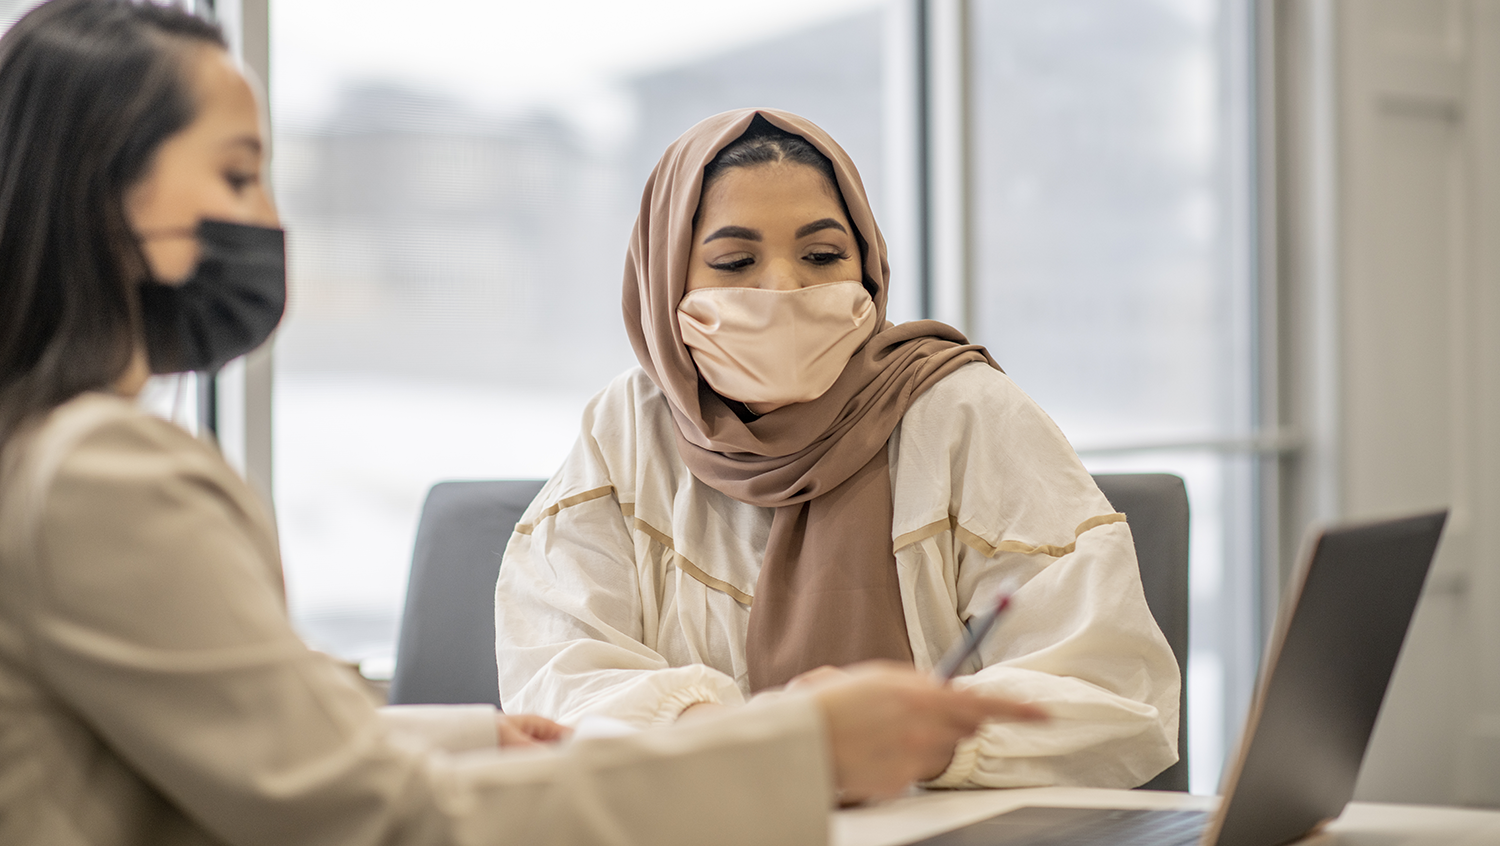 A Muslim woman is sitting at her doctor's office during an appointment